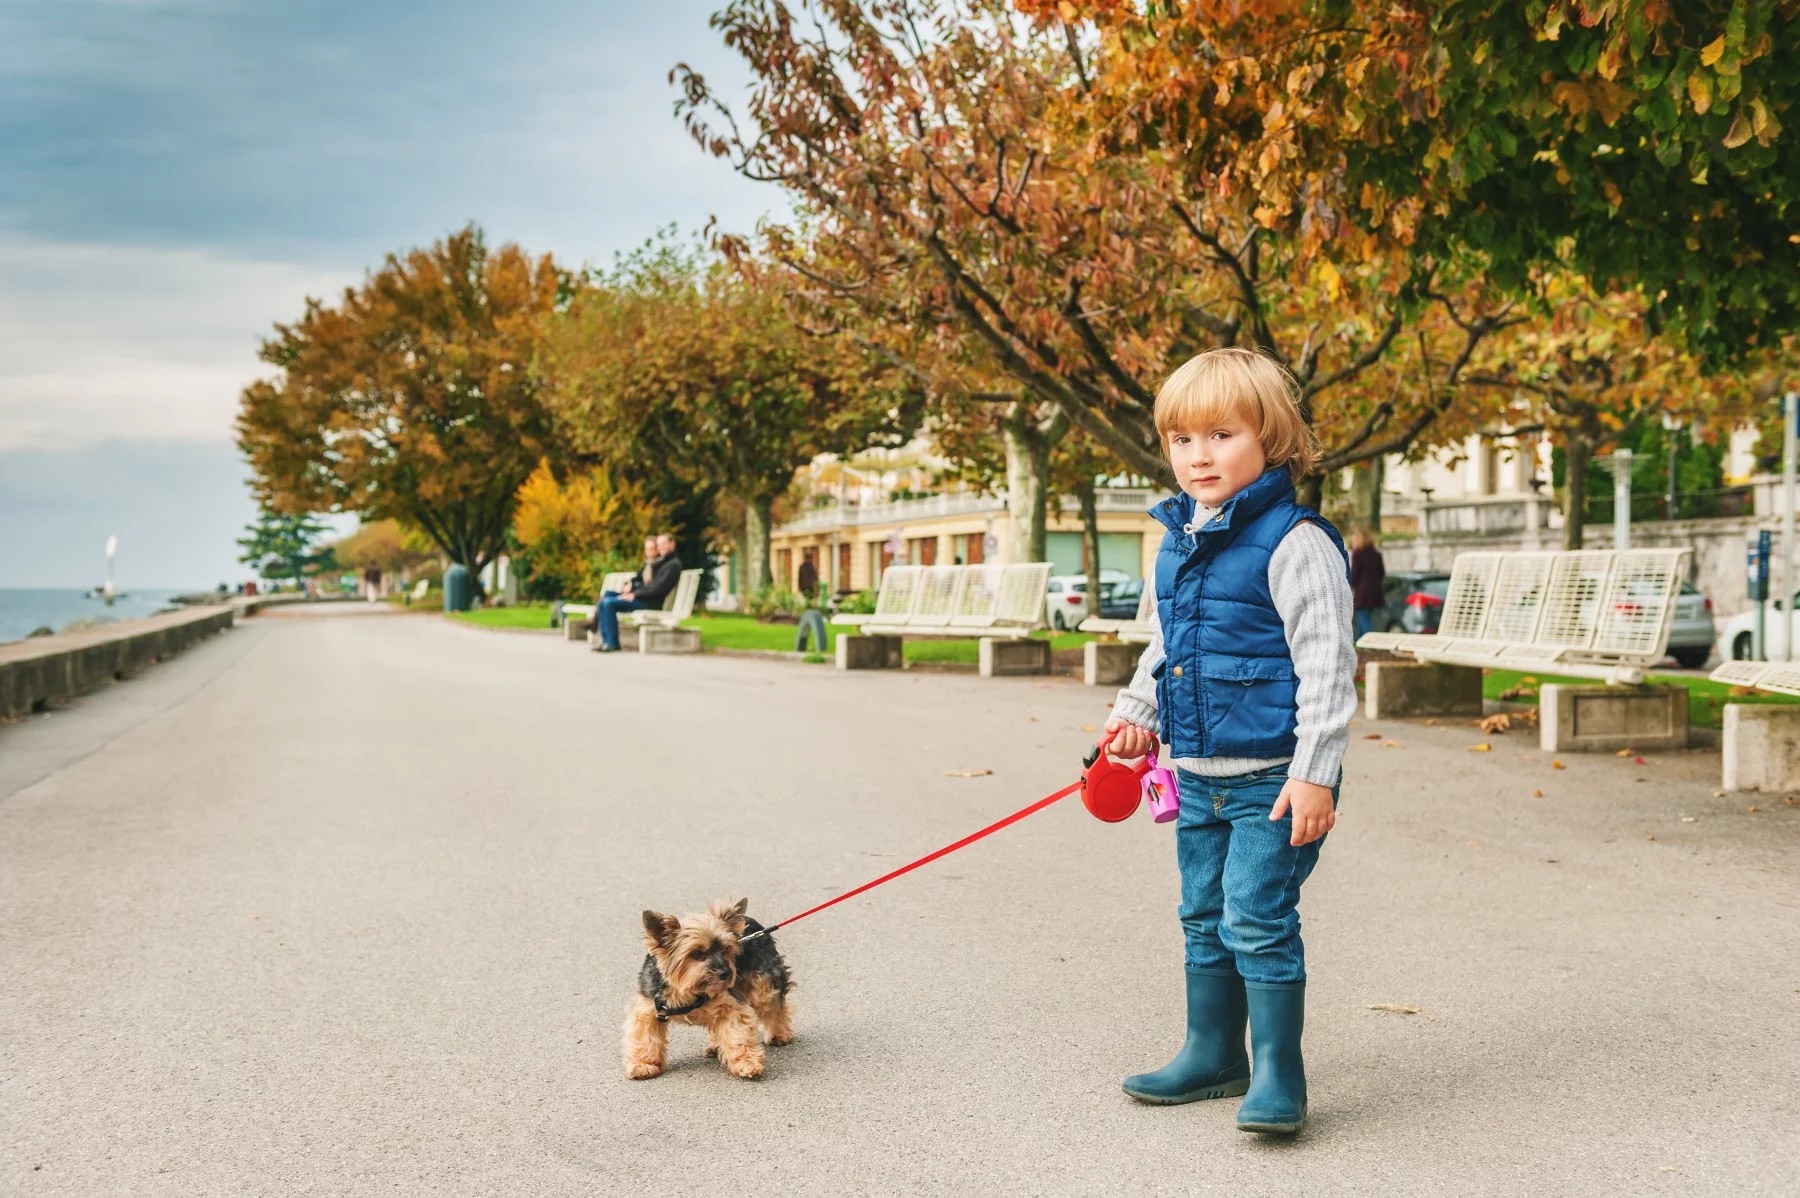 Young Swiss boy with a leashed dog